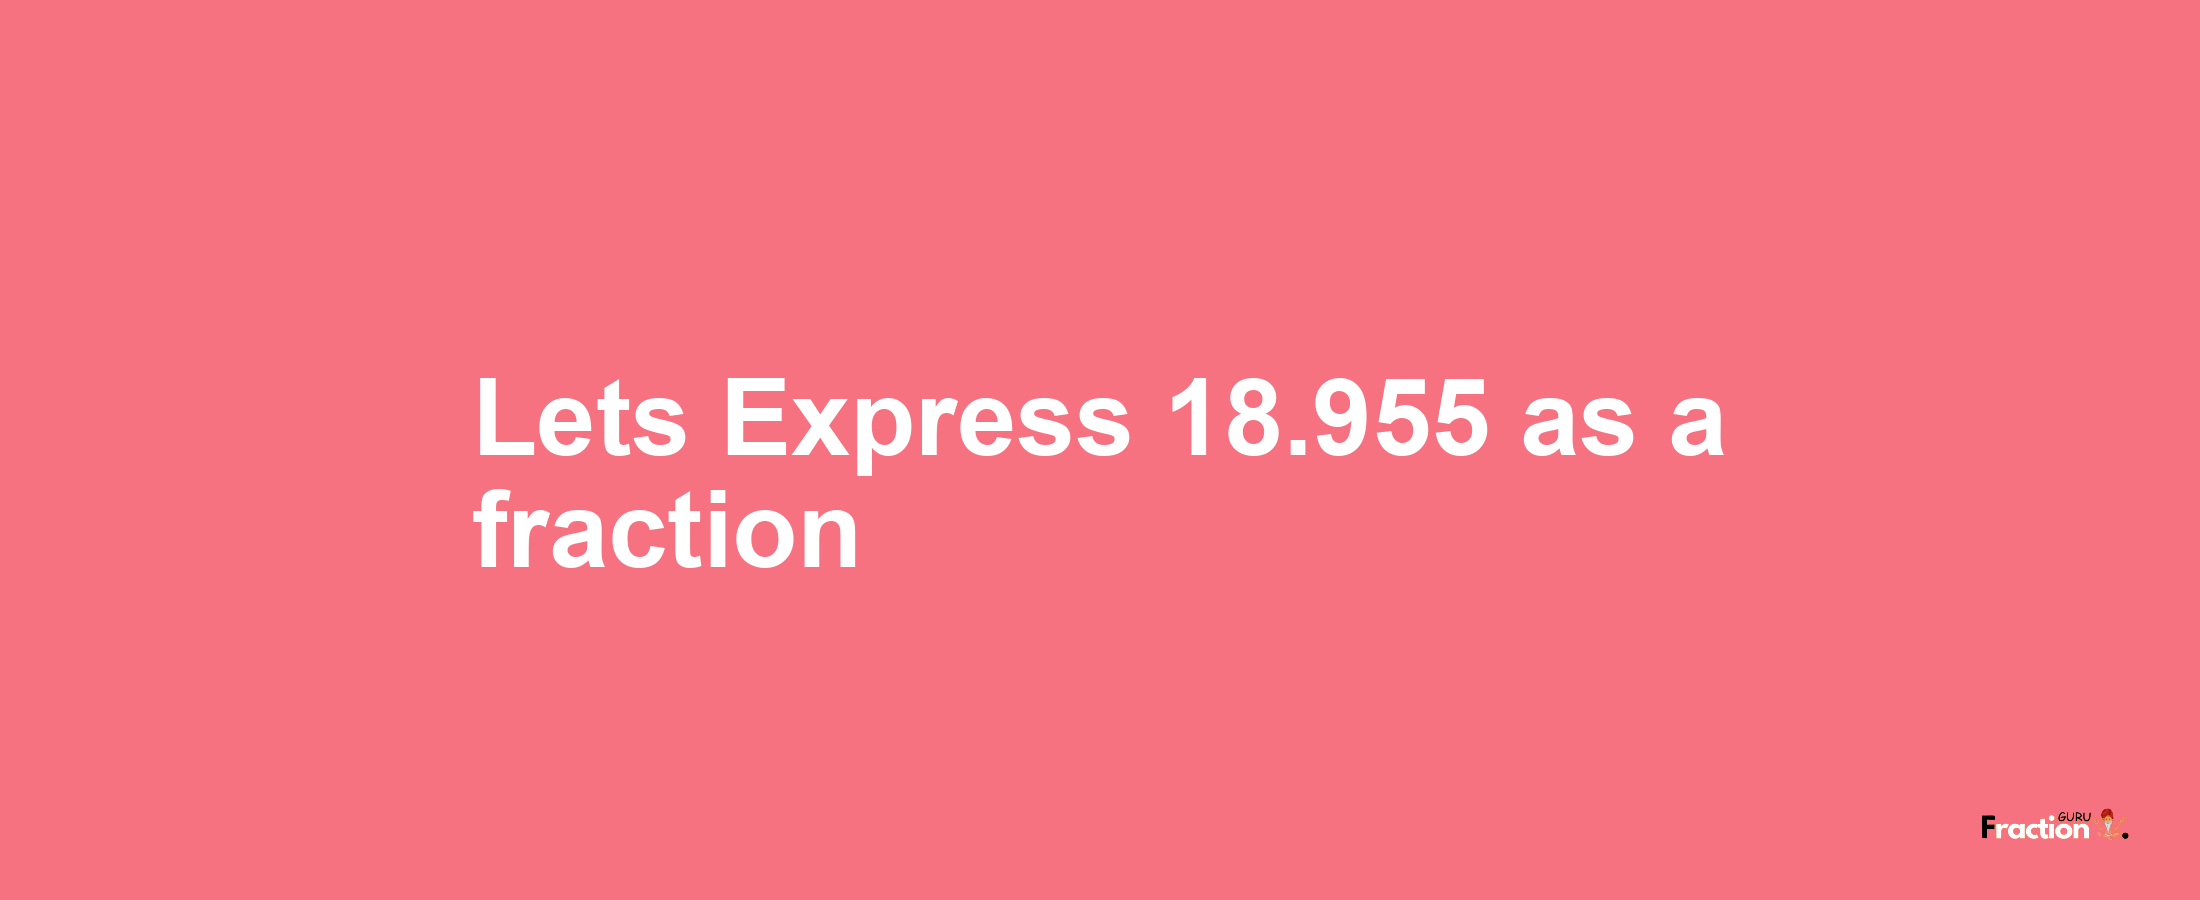 Lets Express 18.955 as afraction